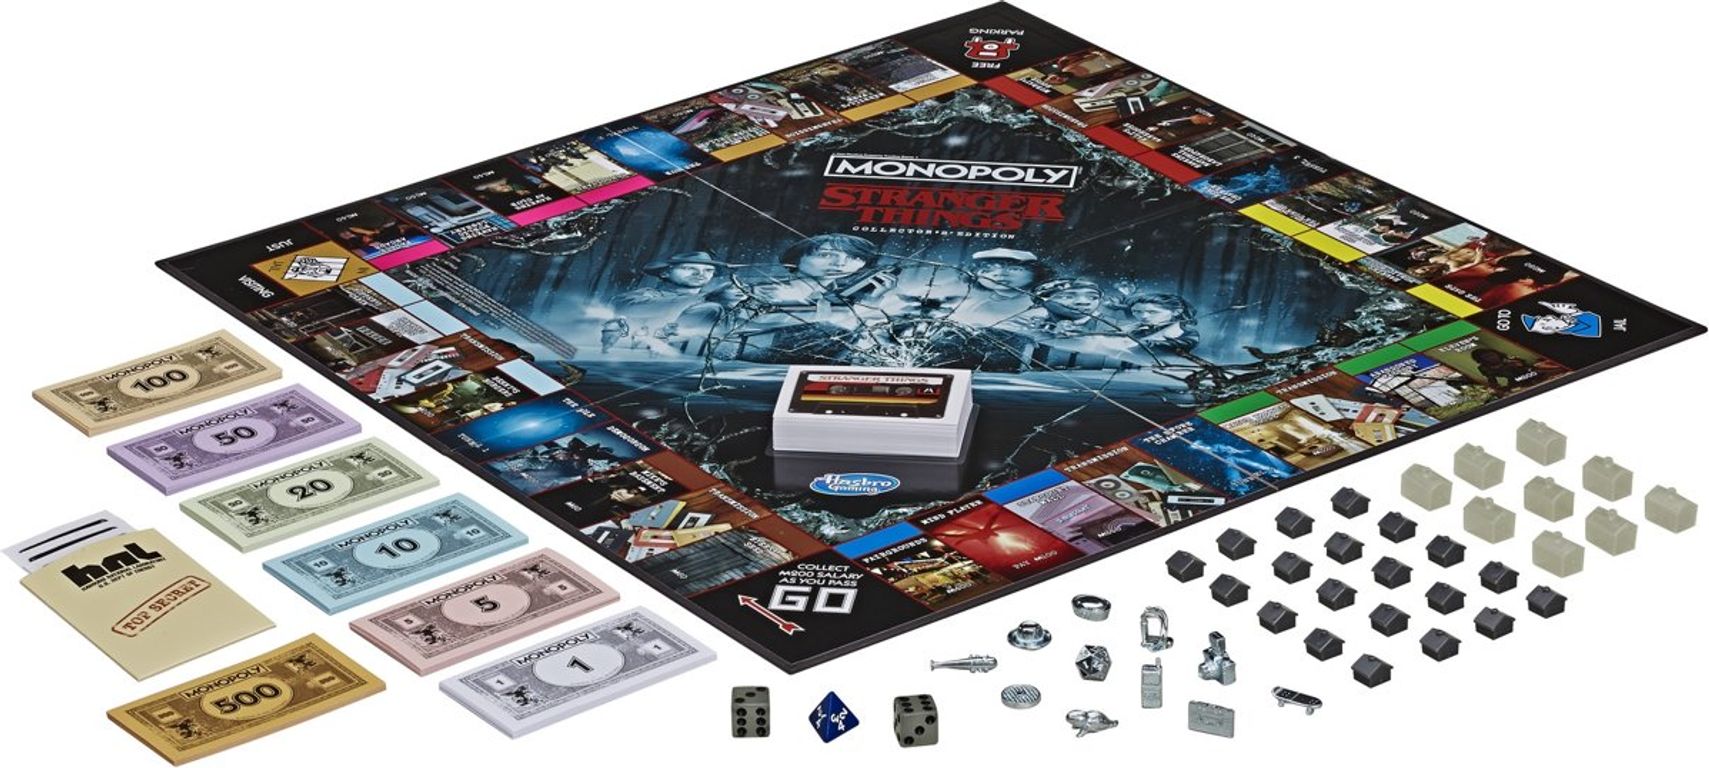 Monopoly Stranger Things Collectors Edition components